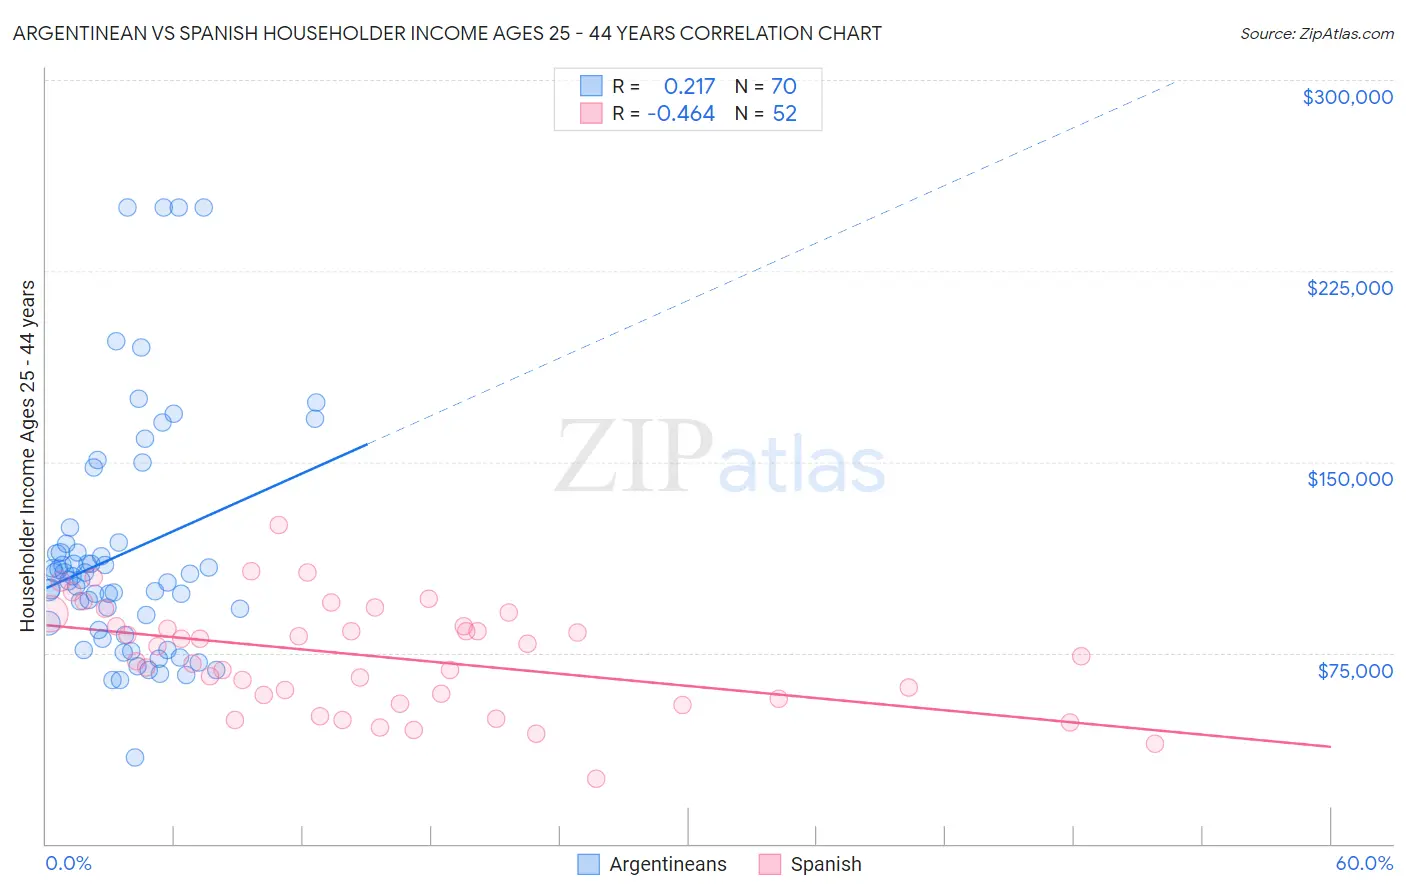 Argentinean vs Spanish Householder Income Ages 25 - 44 years